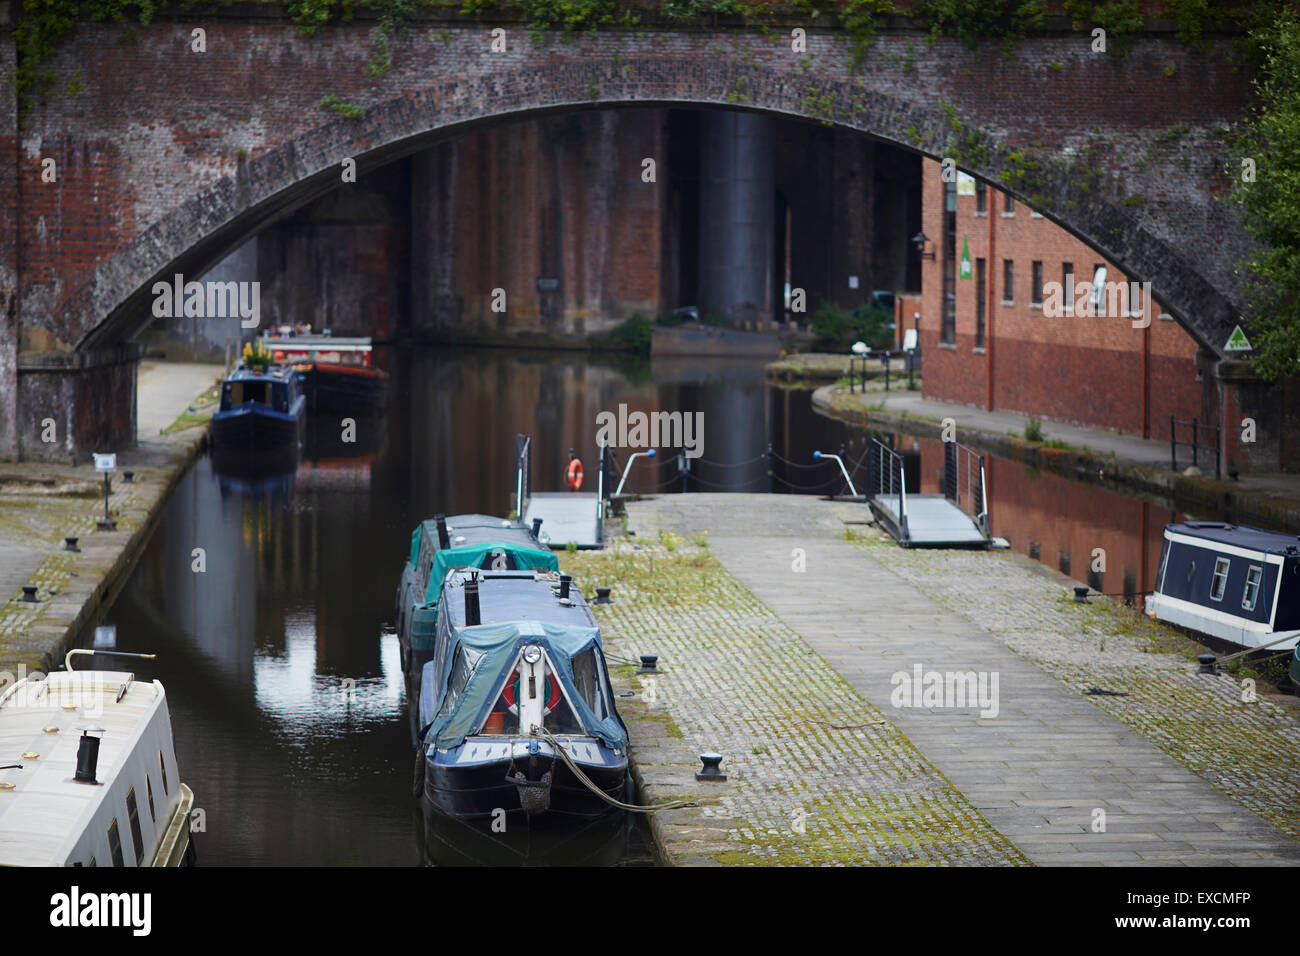 Castlefiled basin in Manchester city centre a First train crosses the viaduct   Boat canal, canals narrowboat  river stream wate Stock Photo